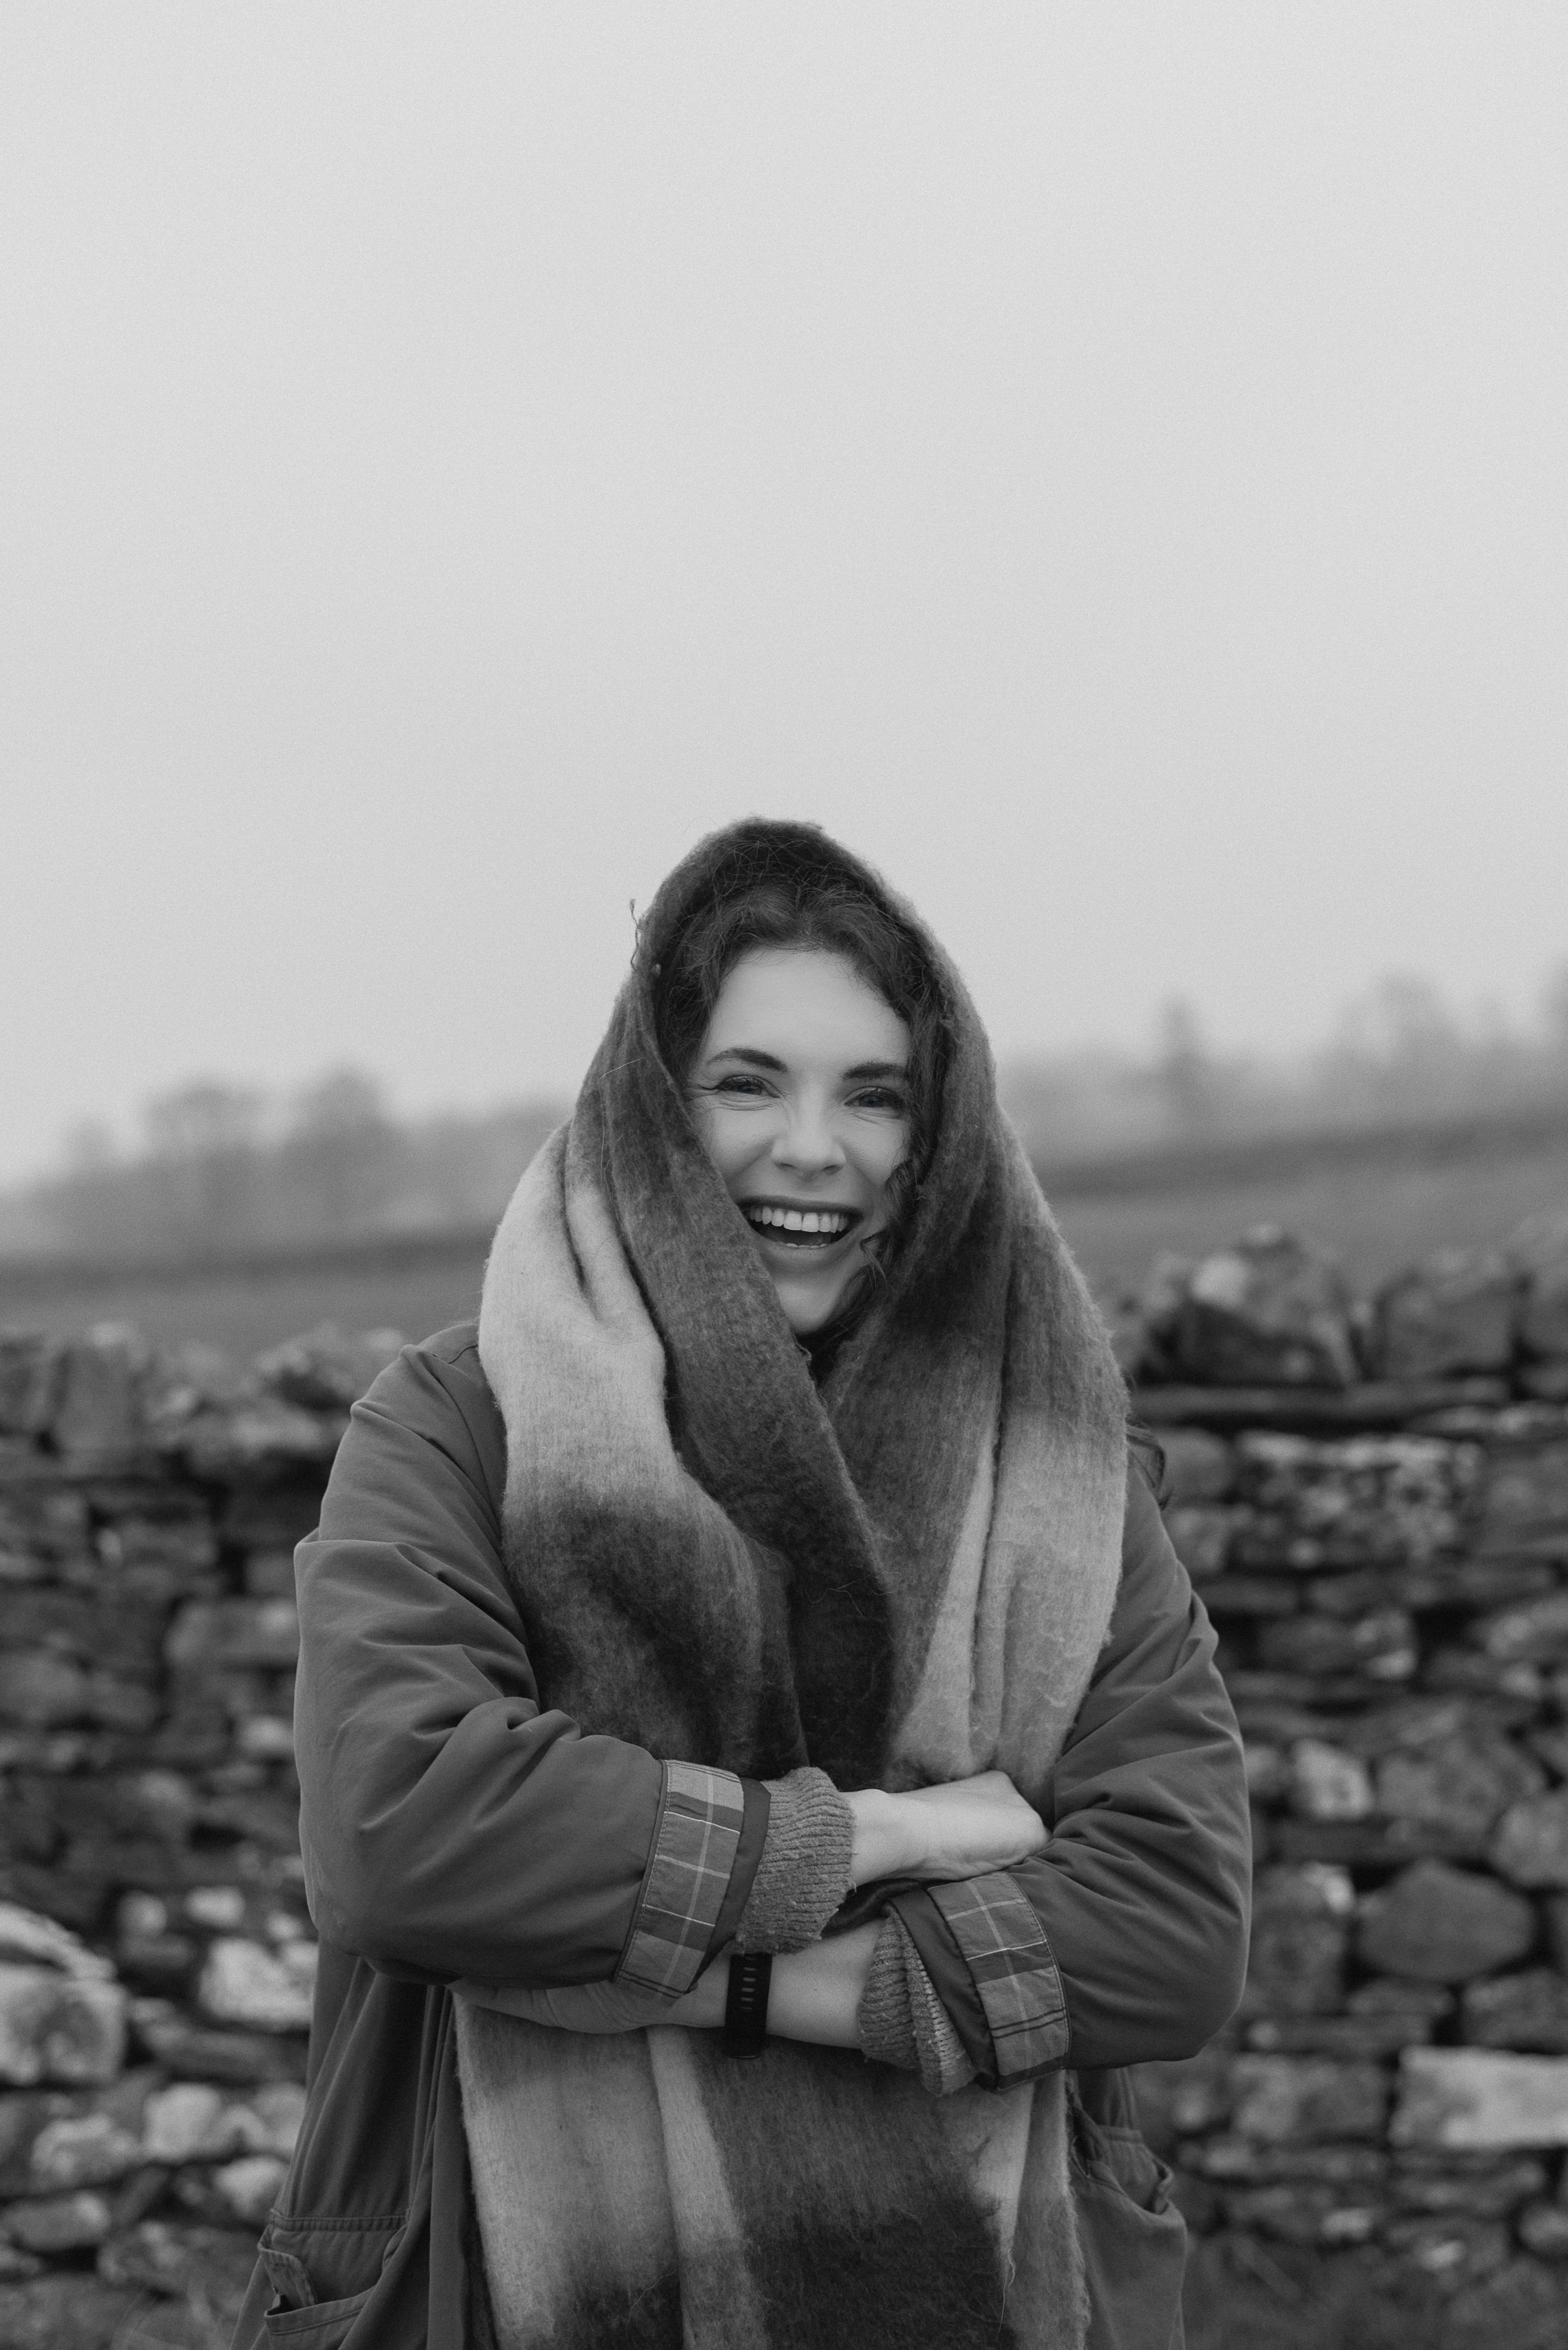 Black and white photo of Joanne smiling. She's got a bit scarf wrapped around her head and shoulders. Behind her is a dry stone wall